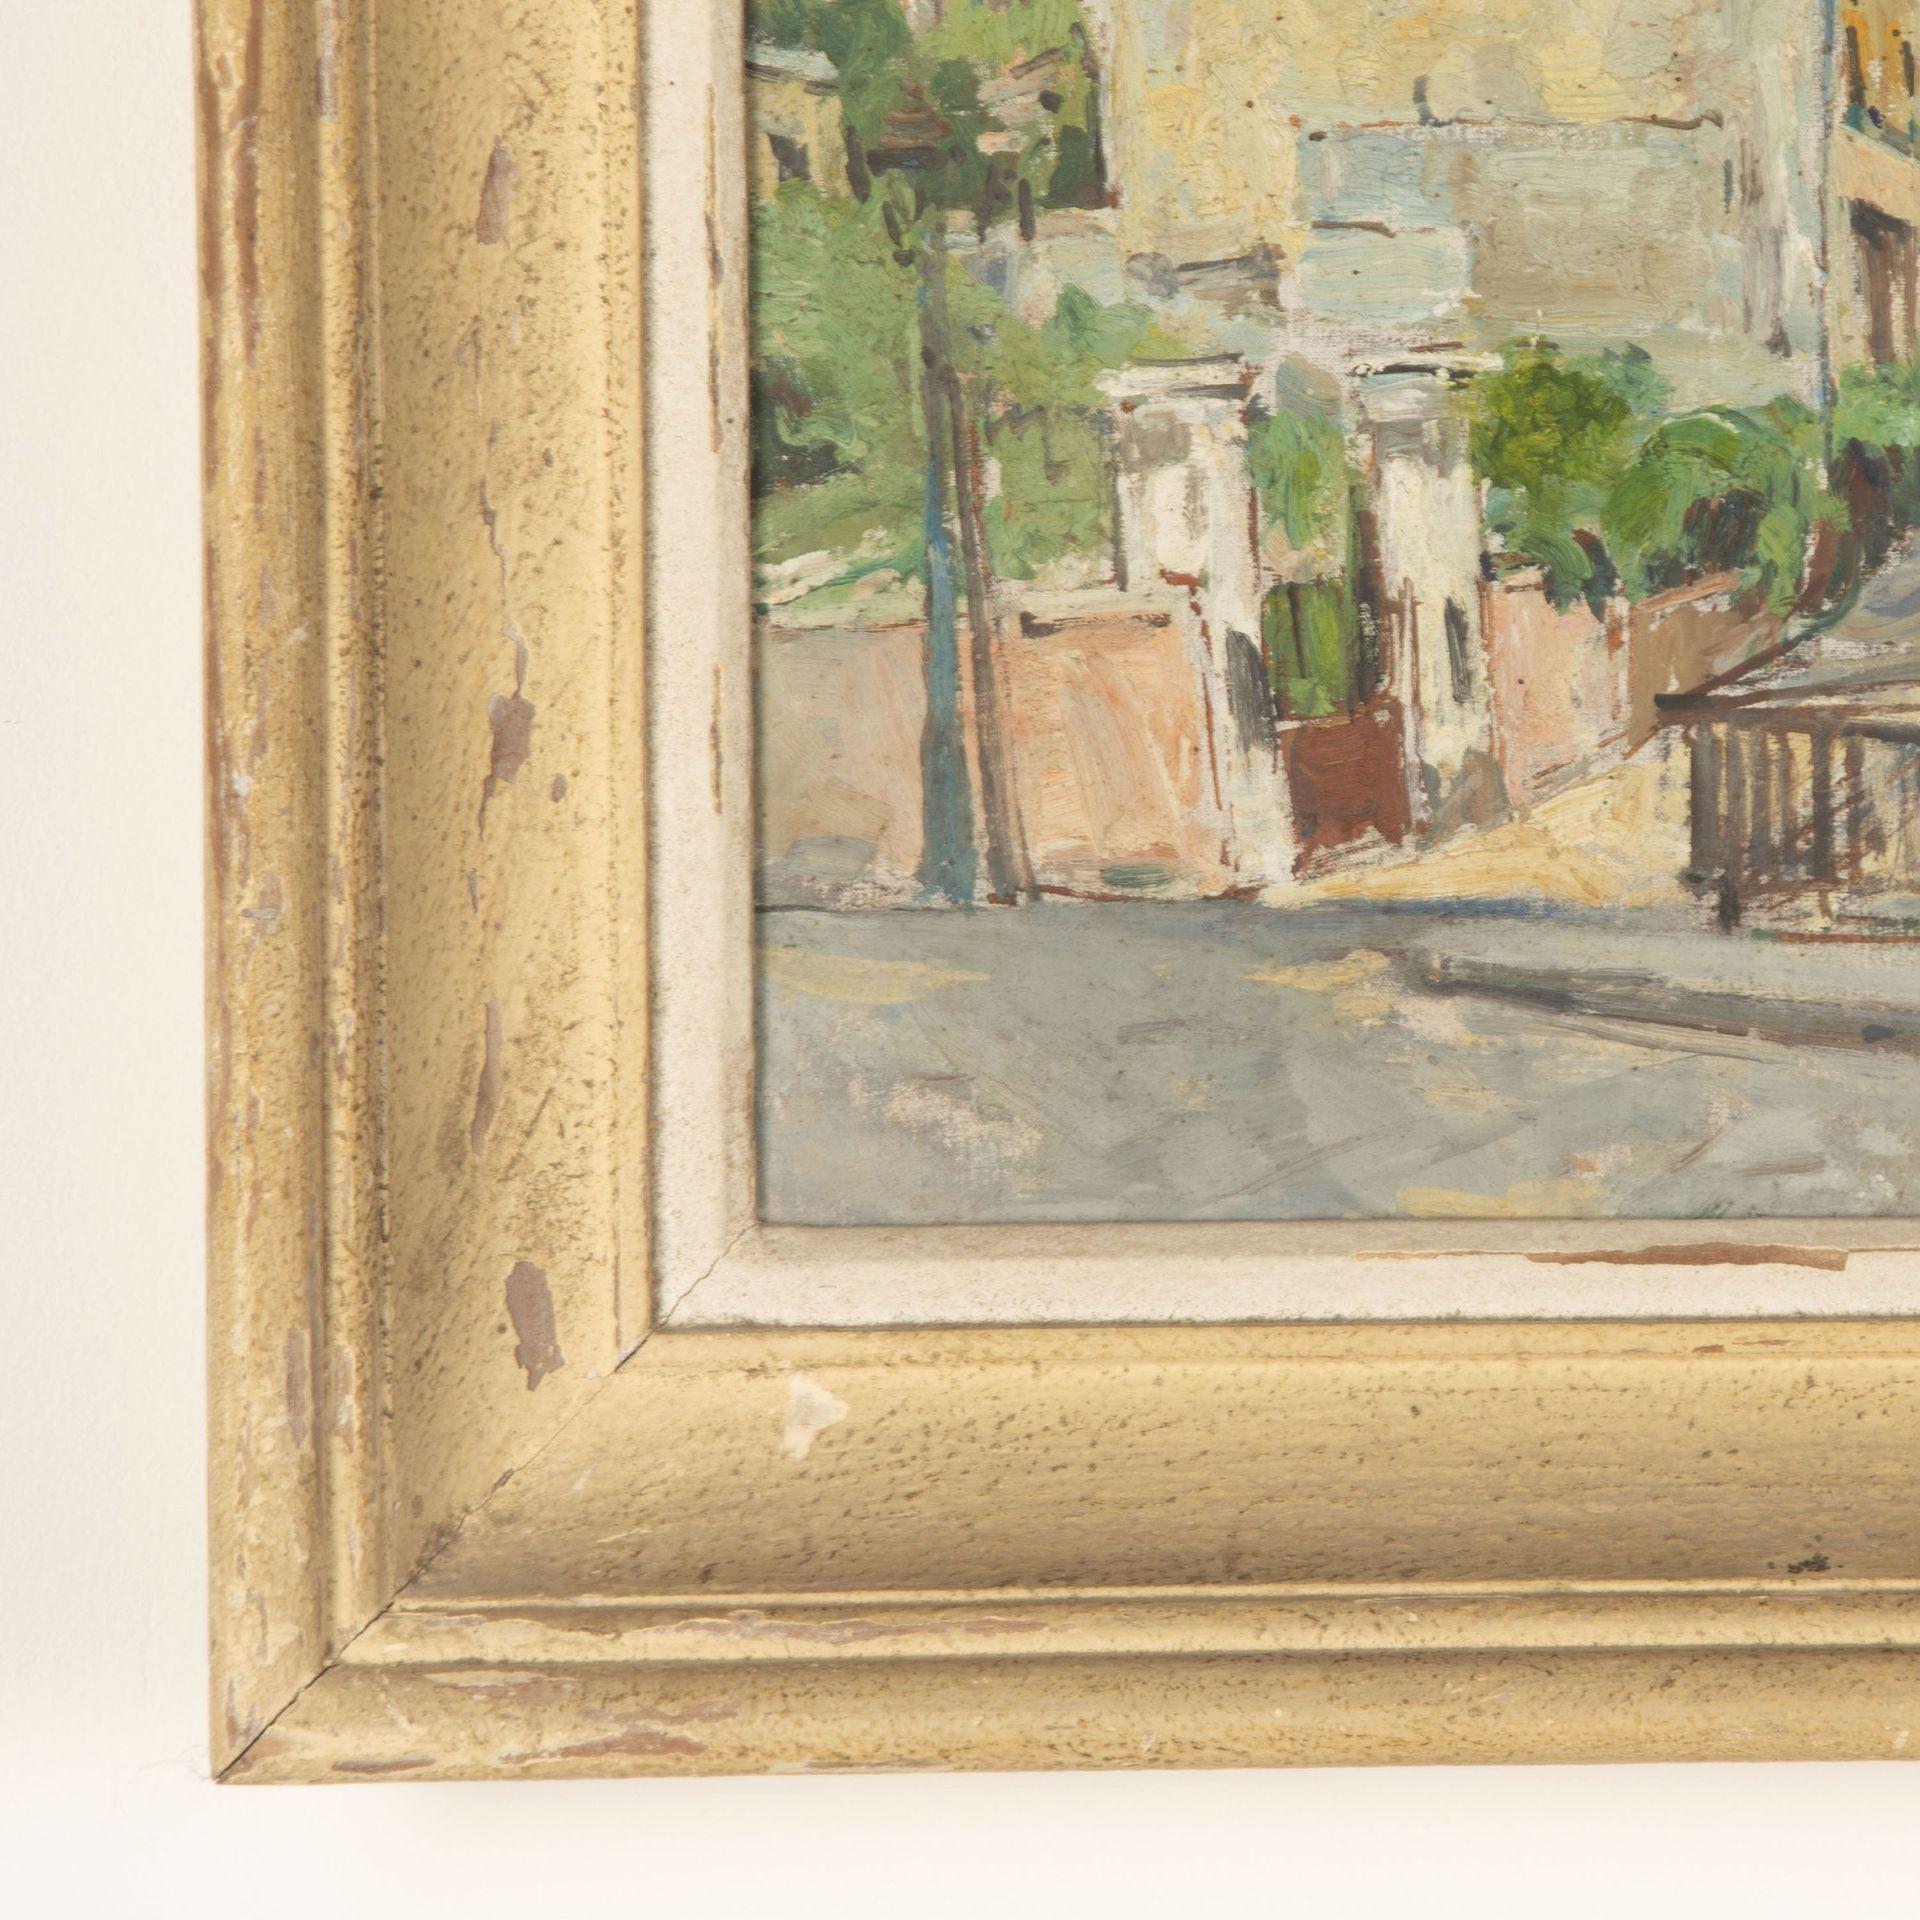 Mid 20th century French oil on canvas painting of Montmartre, indistinctly signed, titled and dated 1947.
Presented in a painted frame of the same period.